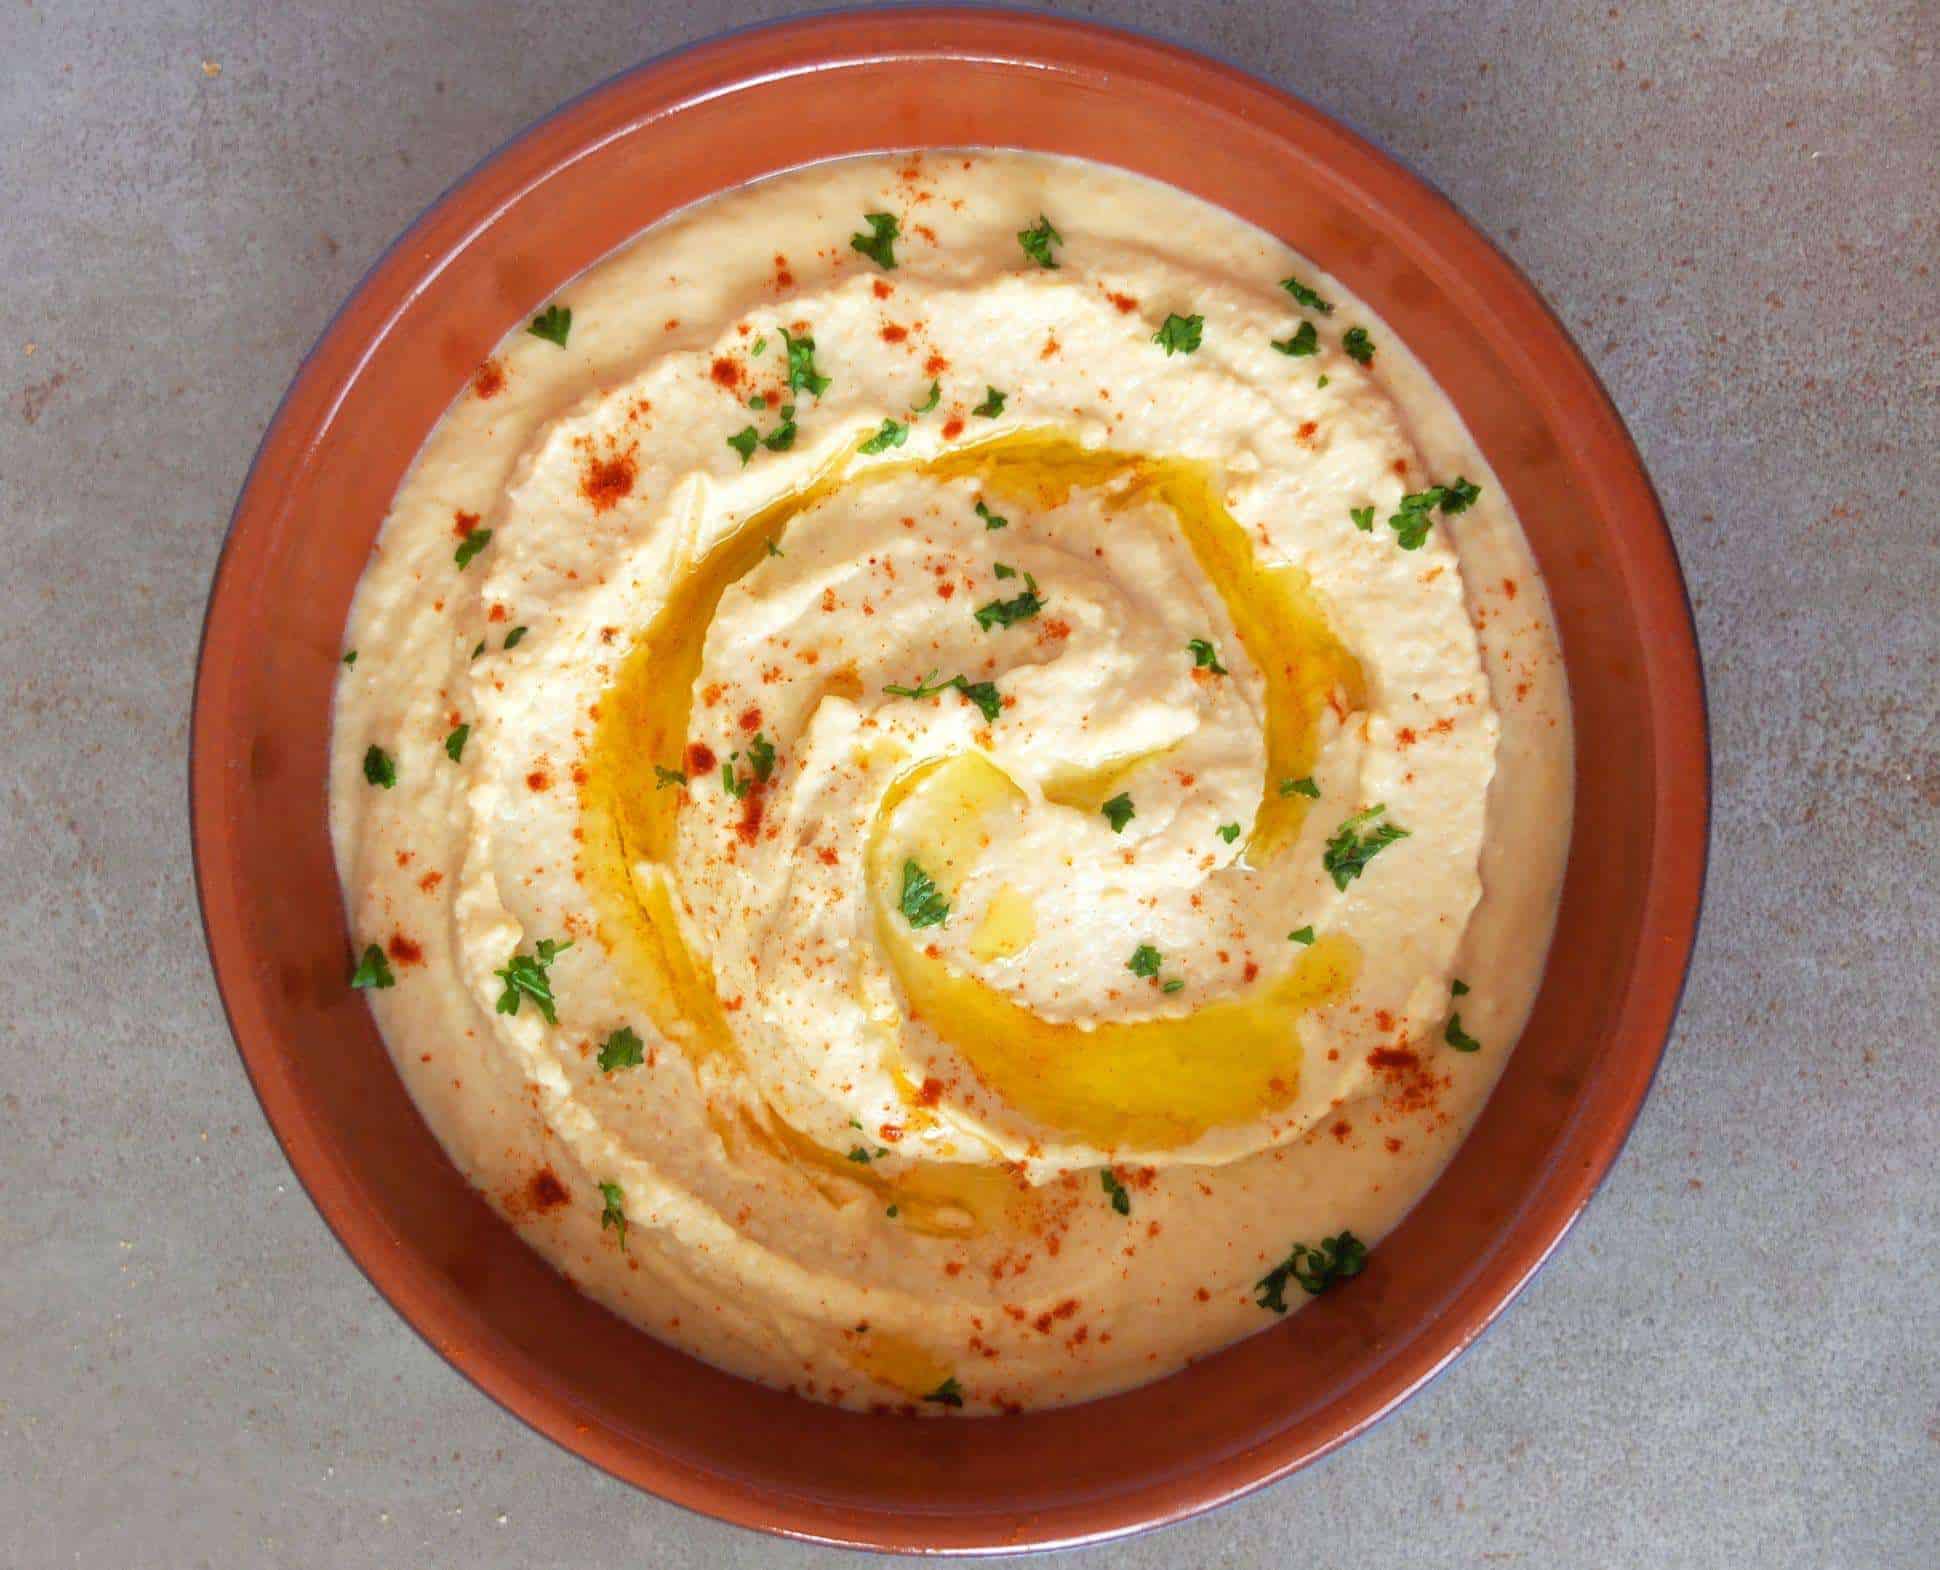 Lebanese hummus recipe from canned chickpeas | My Dinner